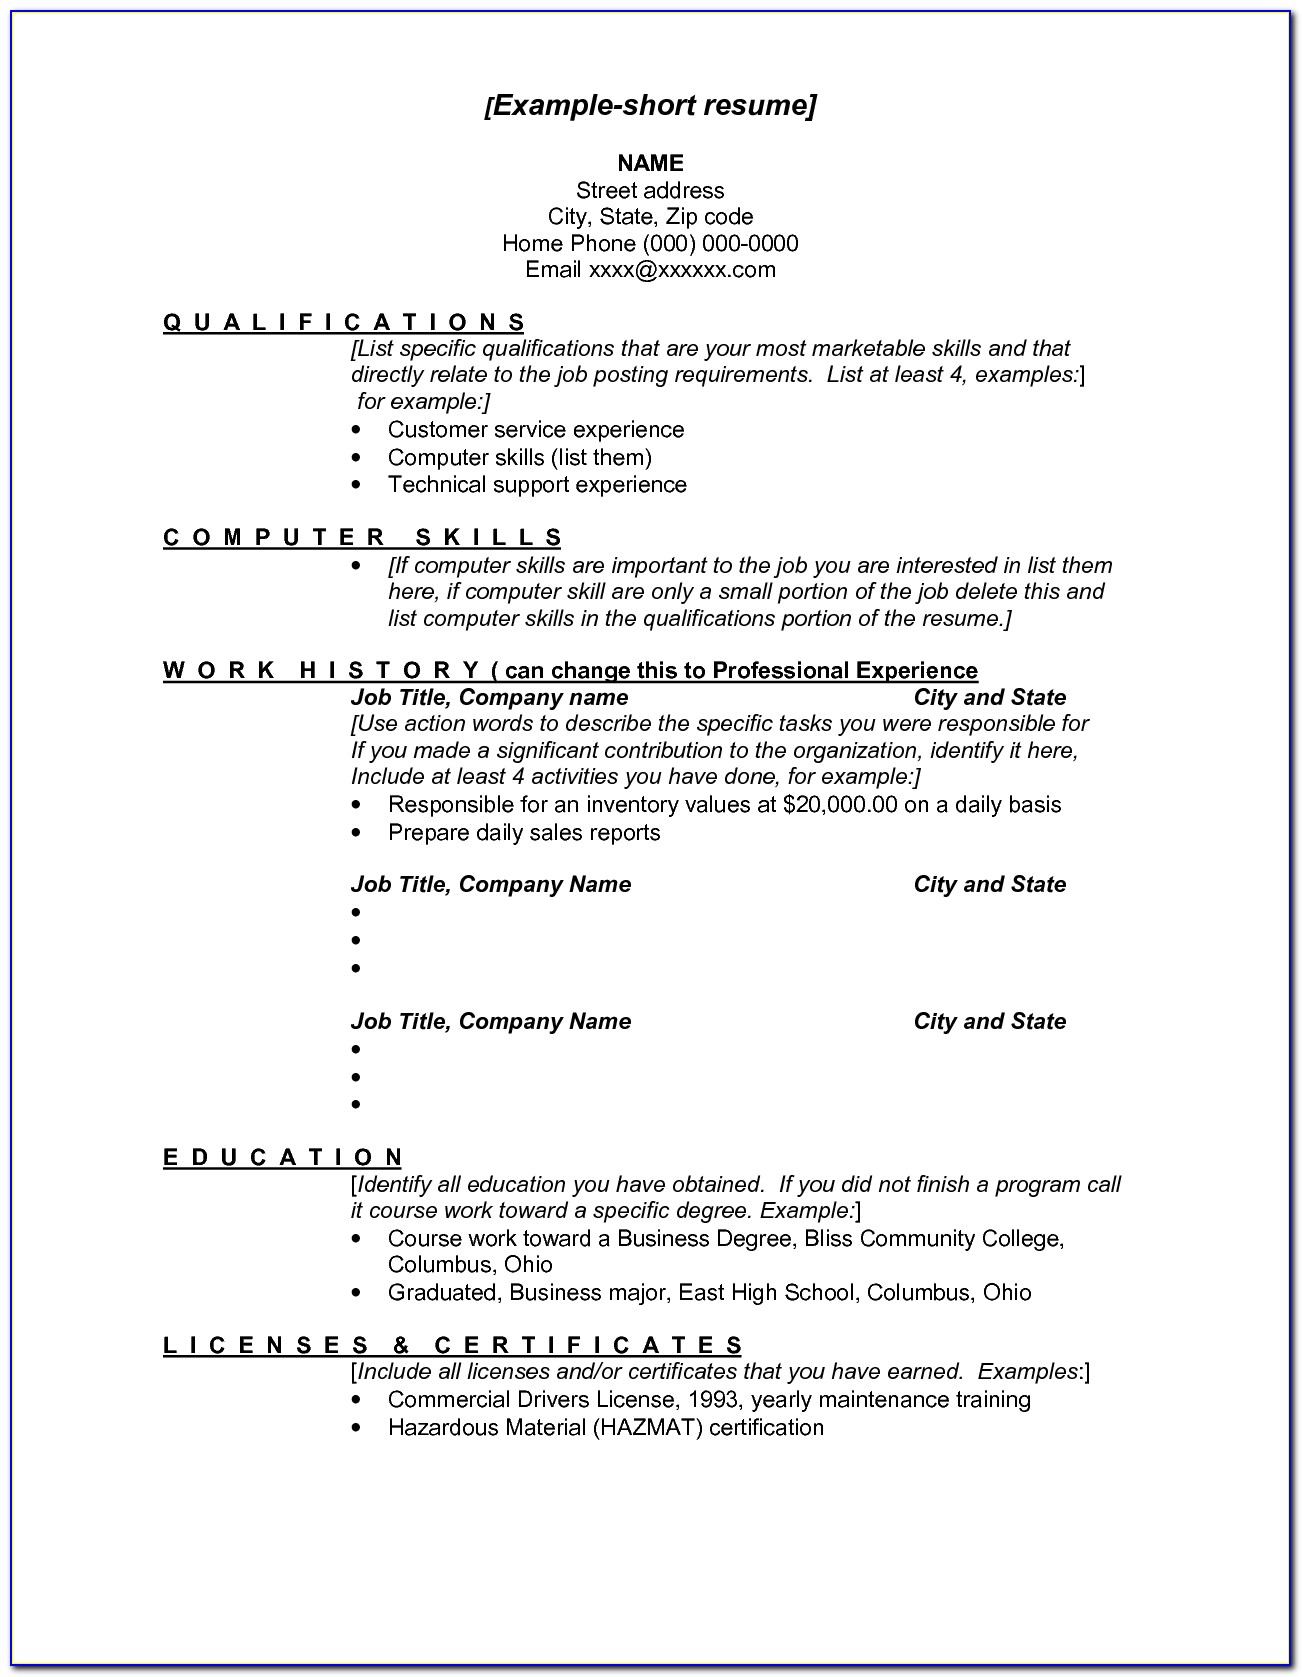 Resume Layout Examples 2017